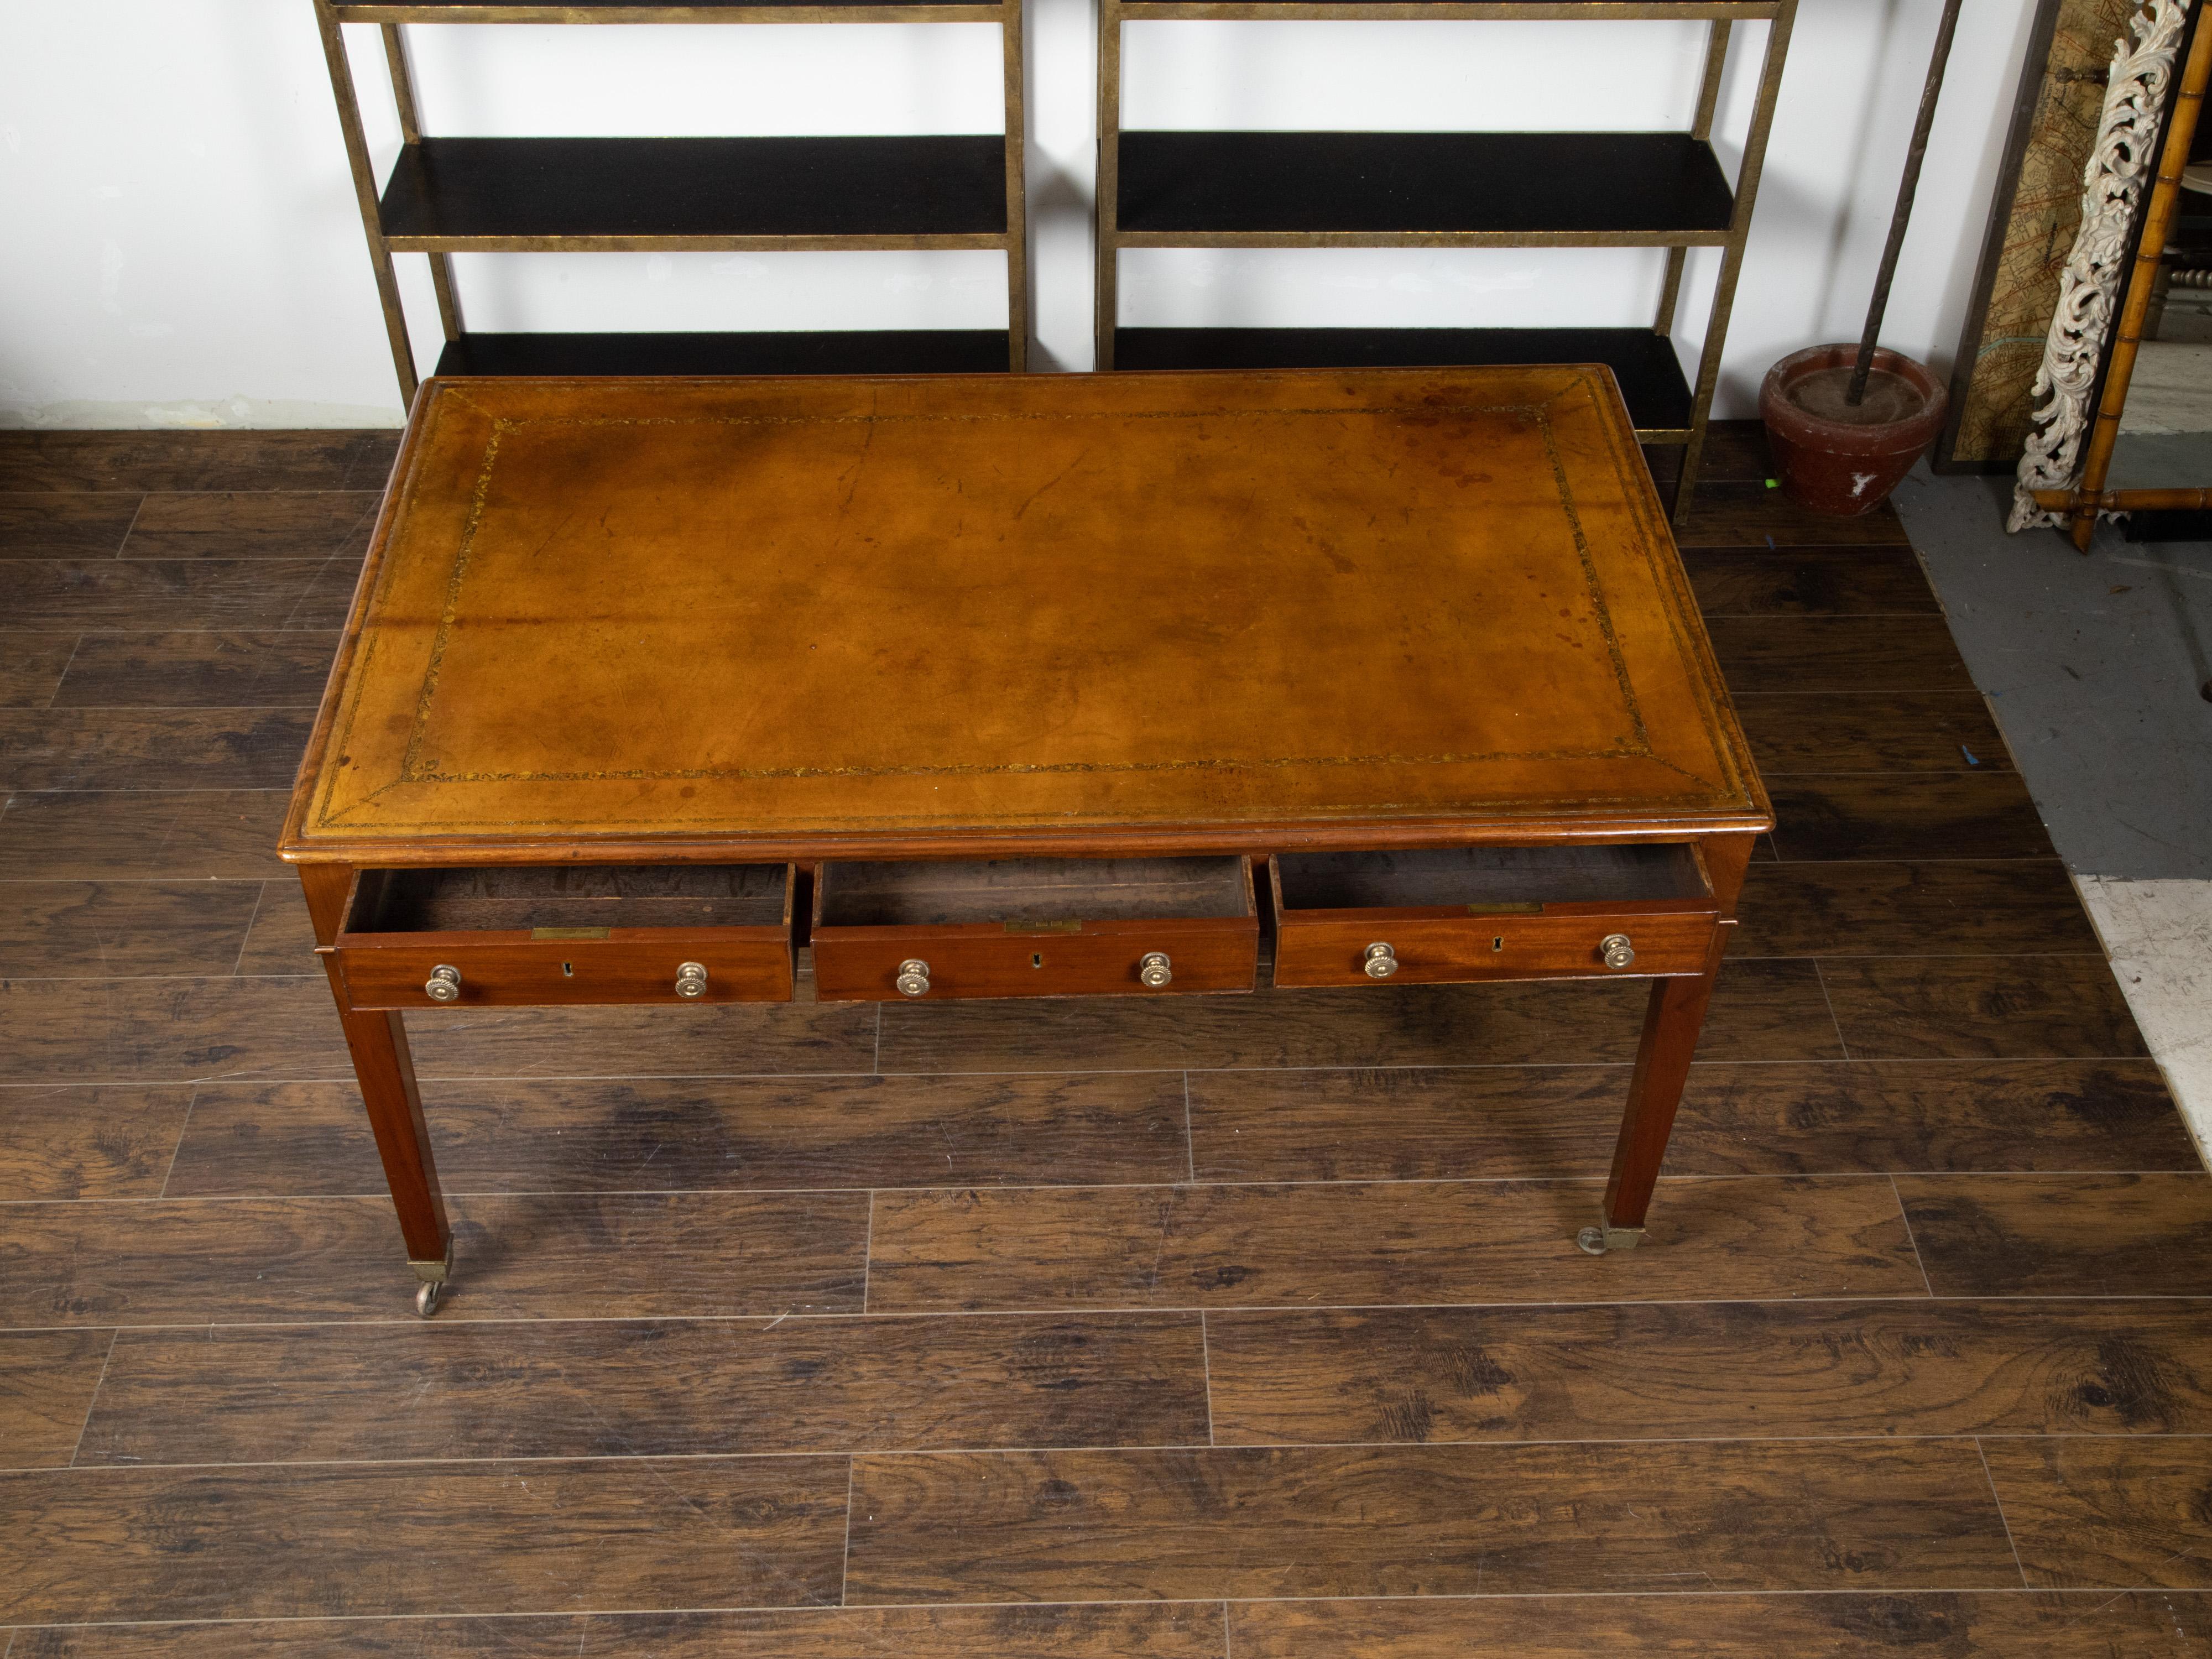 Gilt English 19th Century Mahogany Desk with Three Drawers, Mounted on Brass Casters